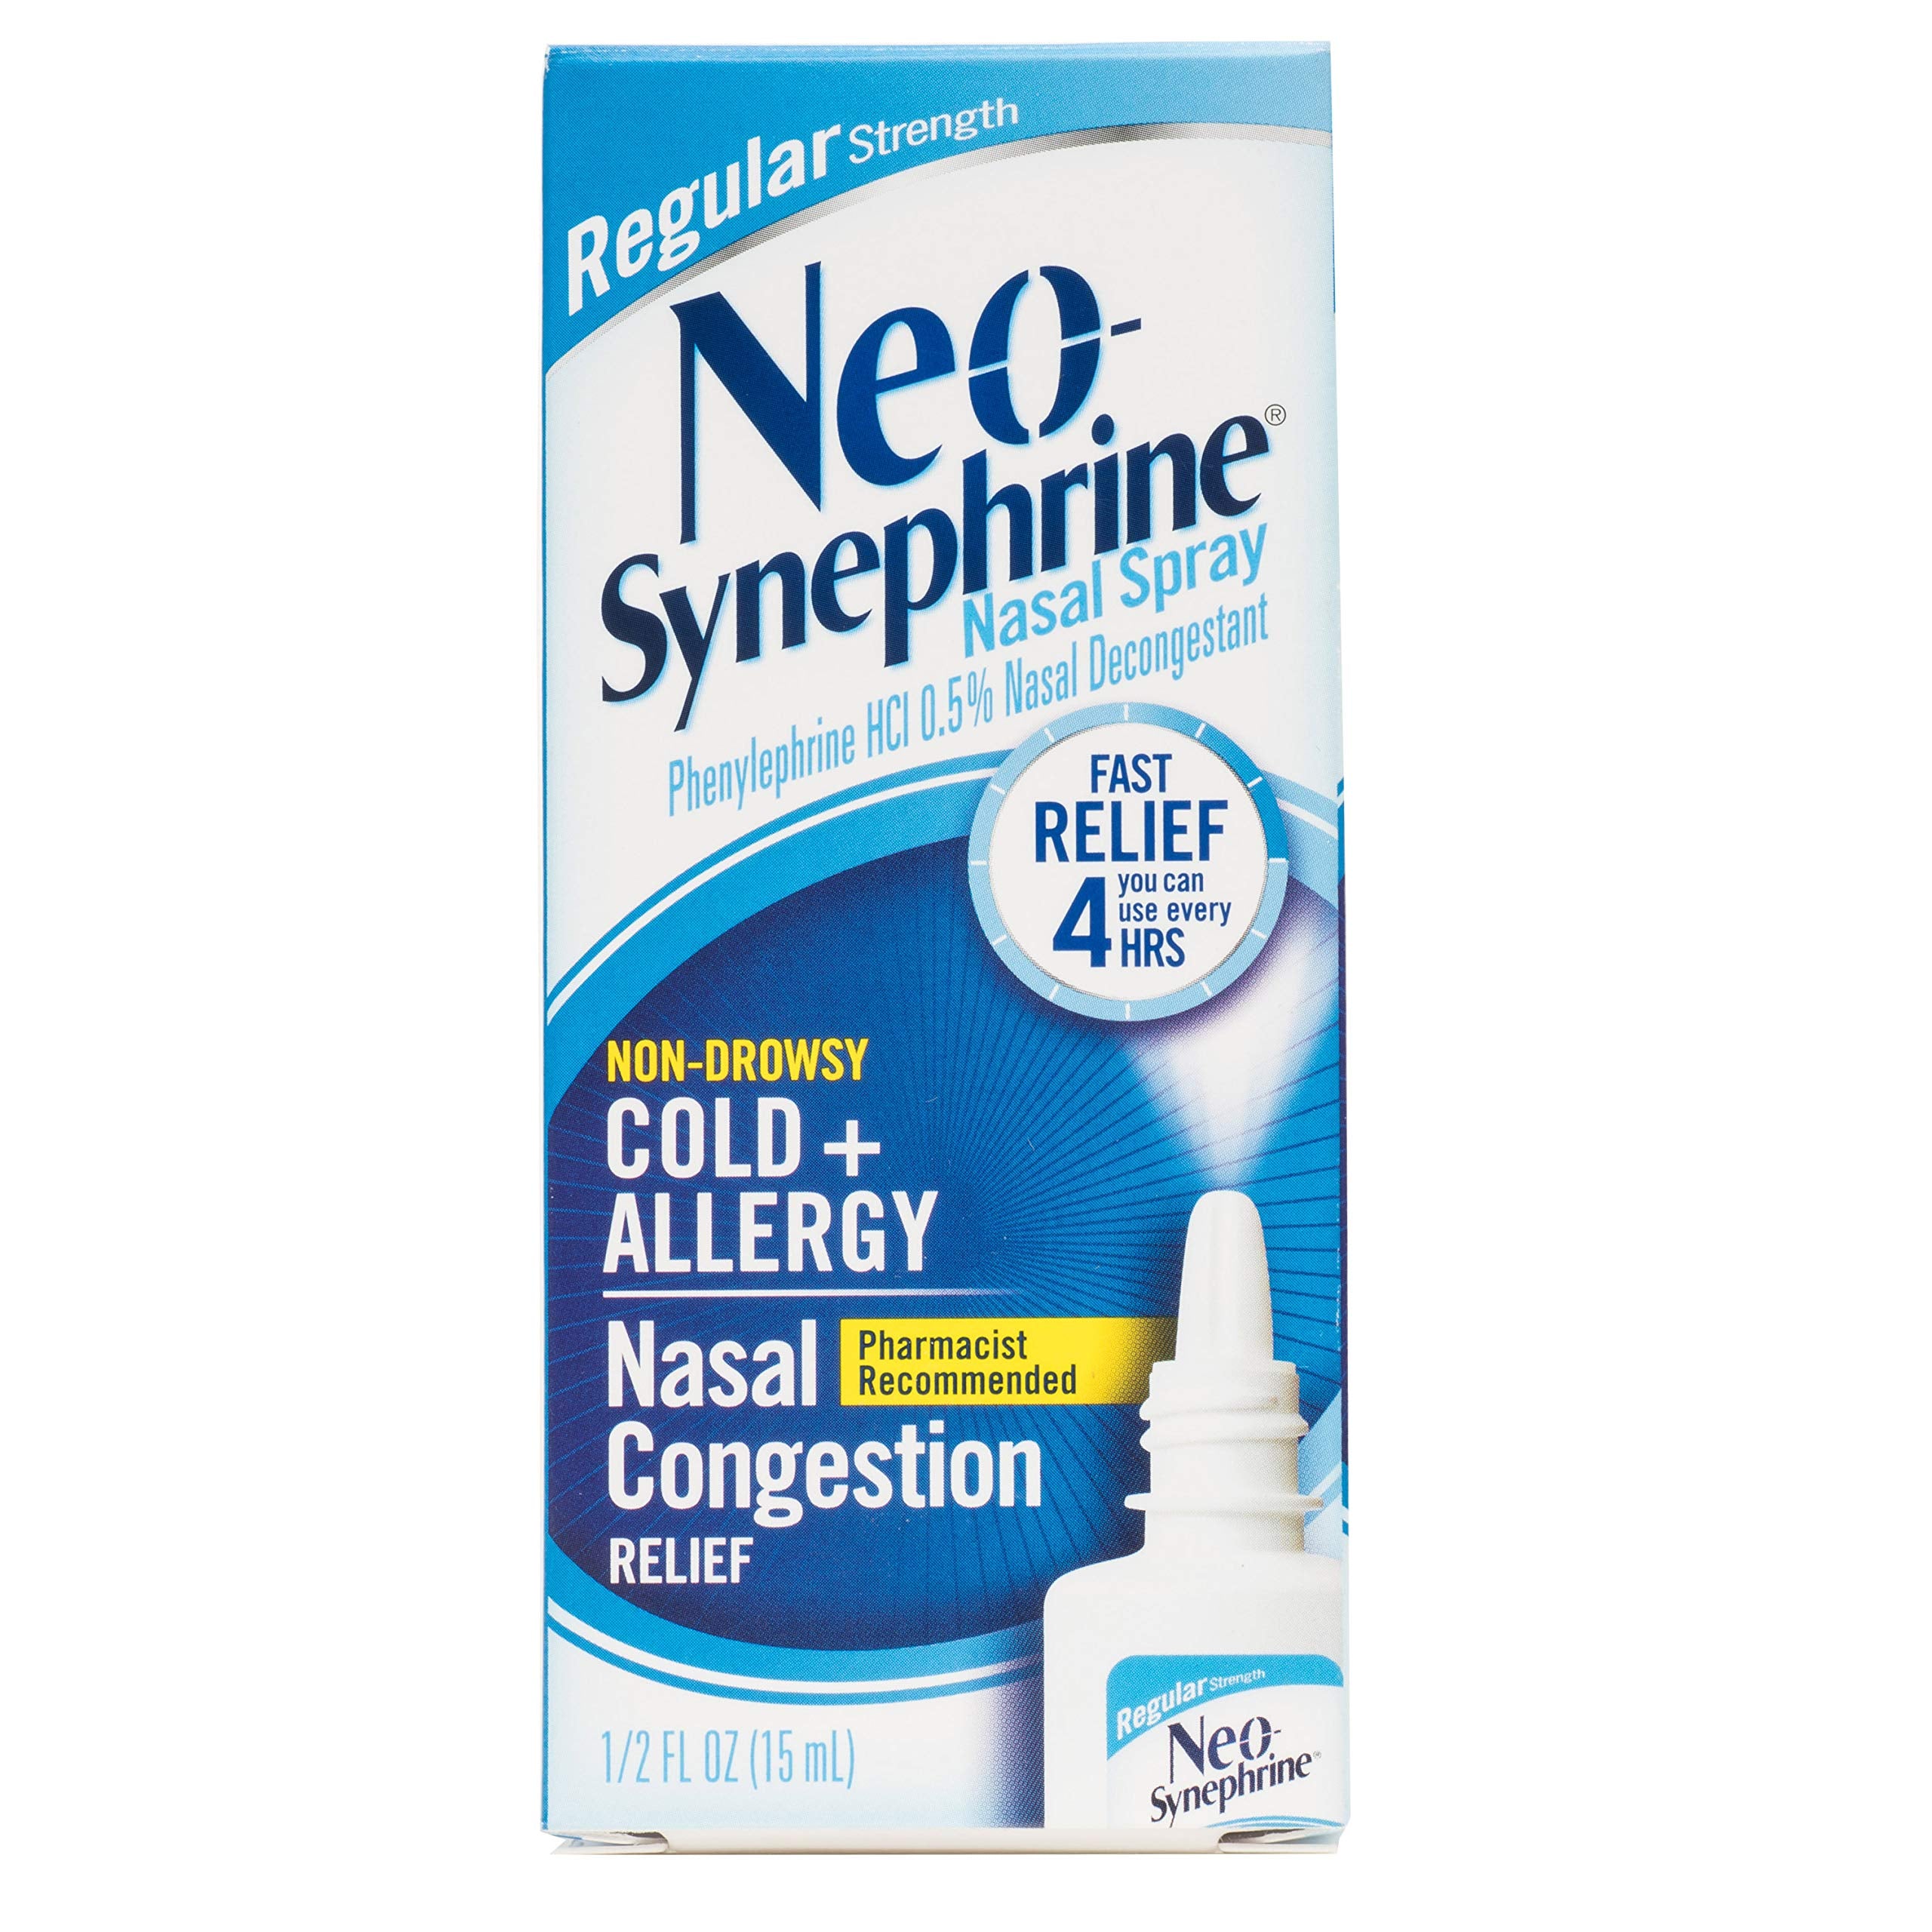 Neosynephrine Nasal Spray for Cold & Sinus Relief, Fast Relief, Pharmacist Recommended, Clear, Regular Strength, 0.5 Fl Oz